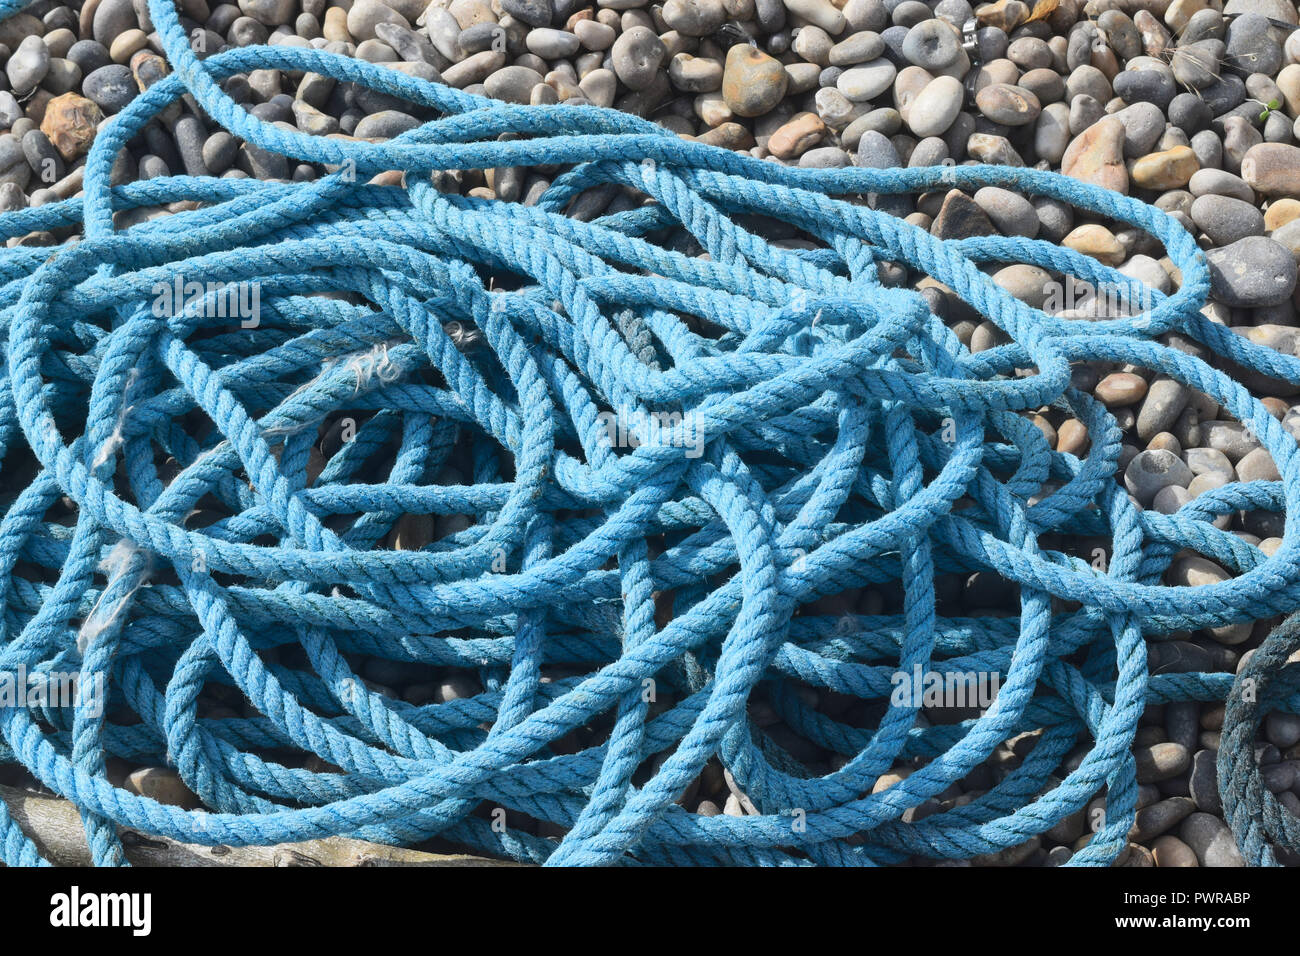 Coiled-up blue rope lying on pebble beach Stock Photo